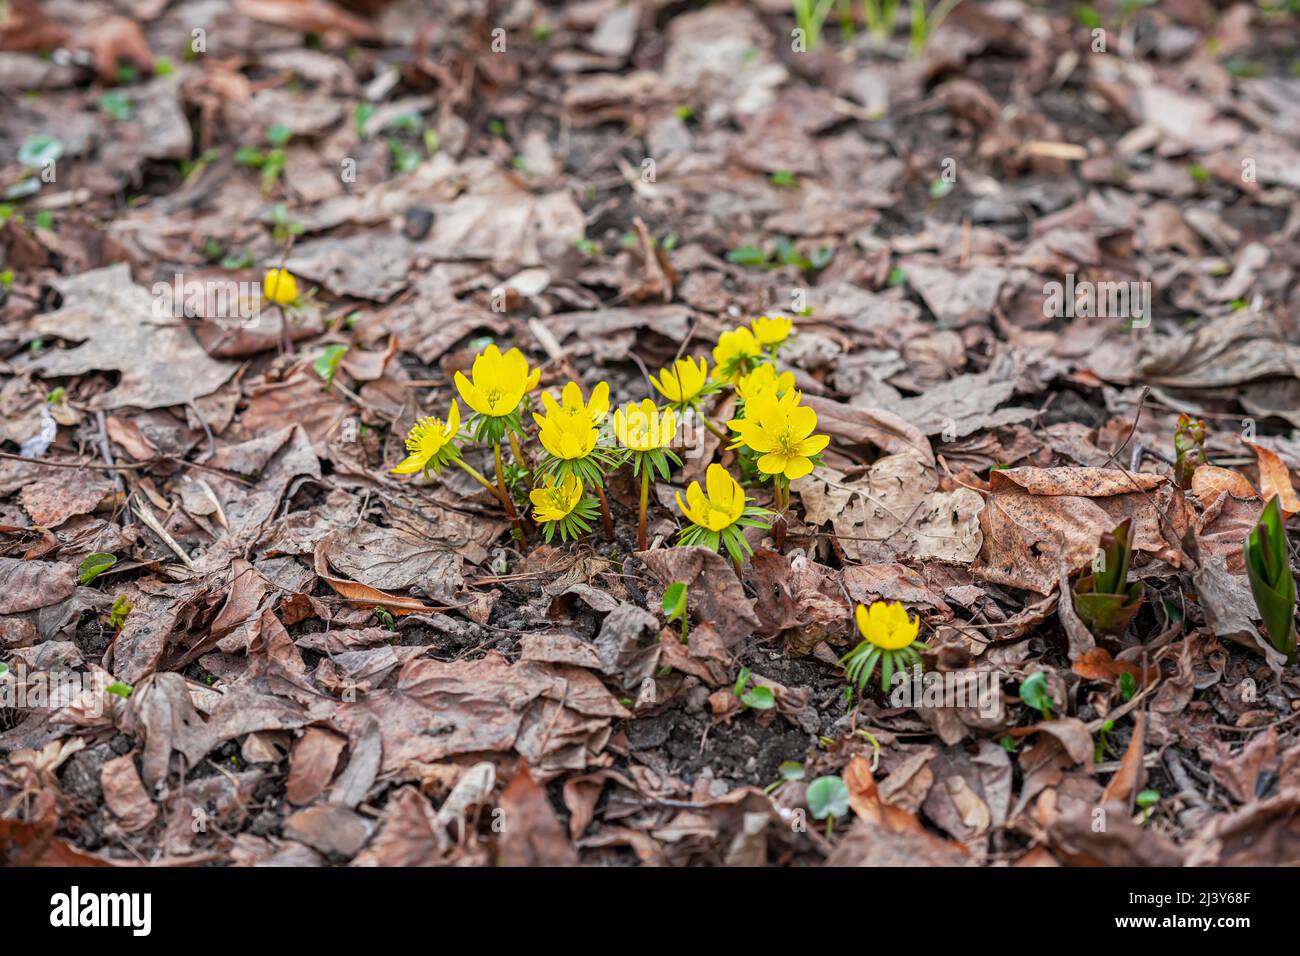 Eranthis. First bright yellow primroses among fallen leaves in forest. Concept of seasons, weather, spring Stock Photo